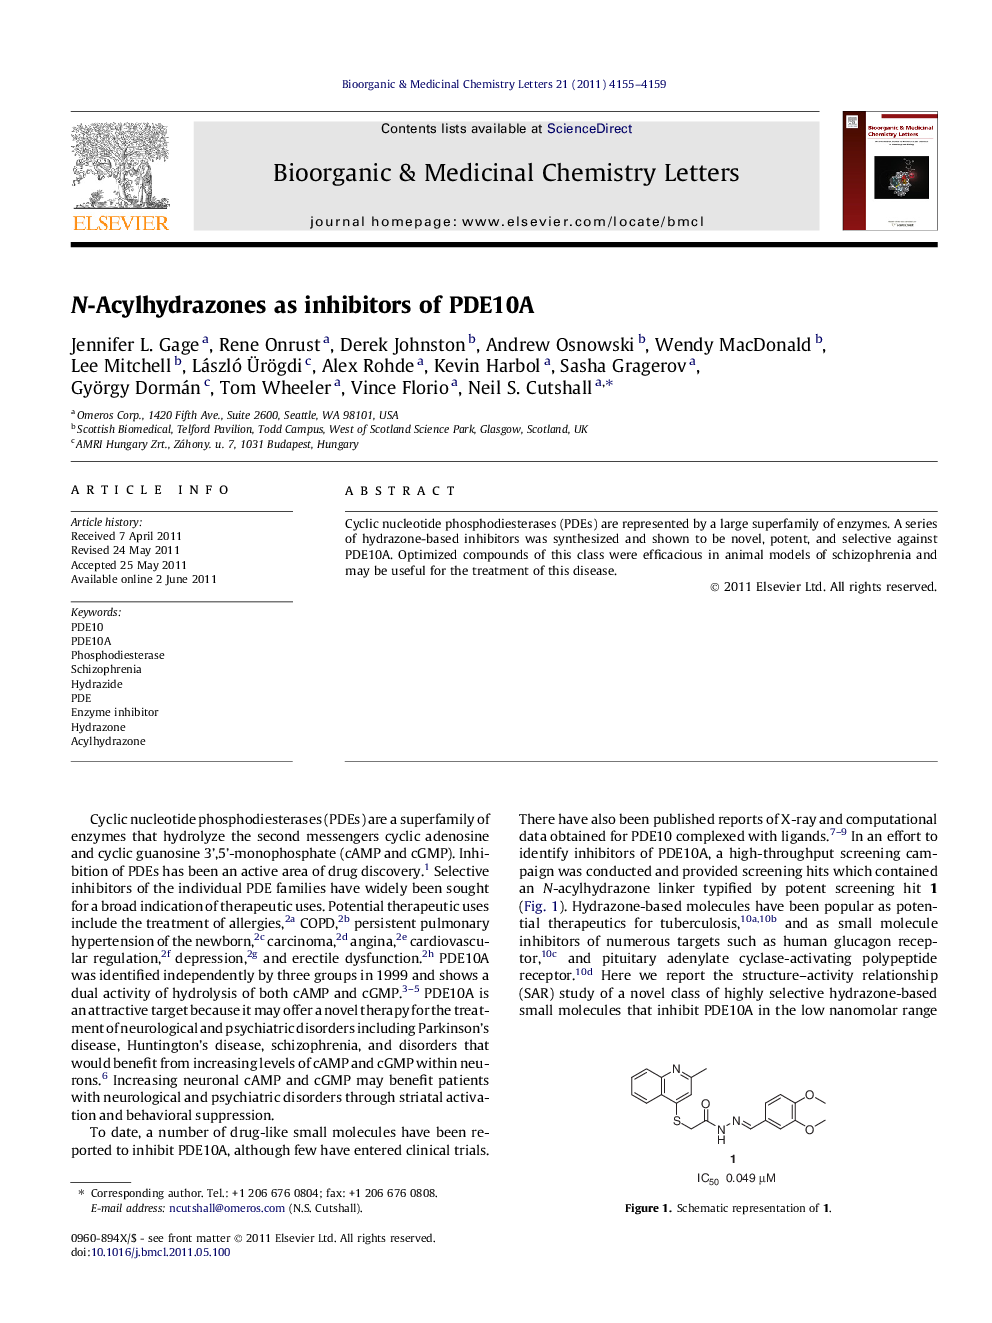 N-Acylhydrazones as inhibitors of PDE10A